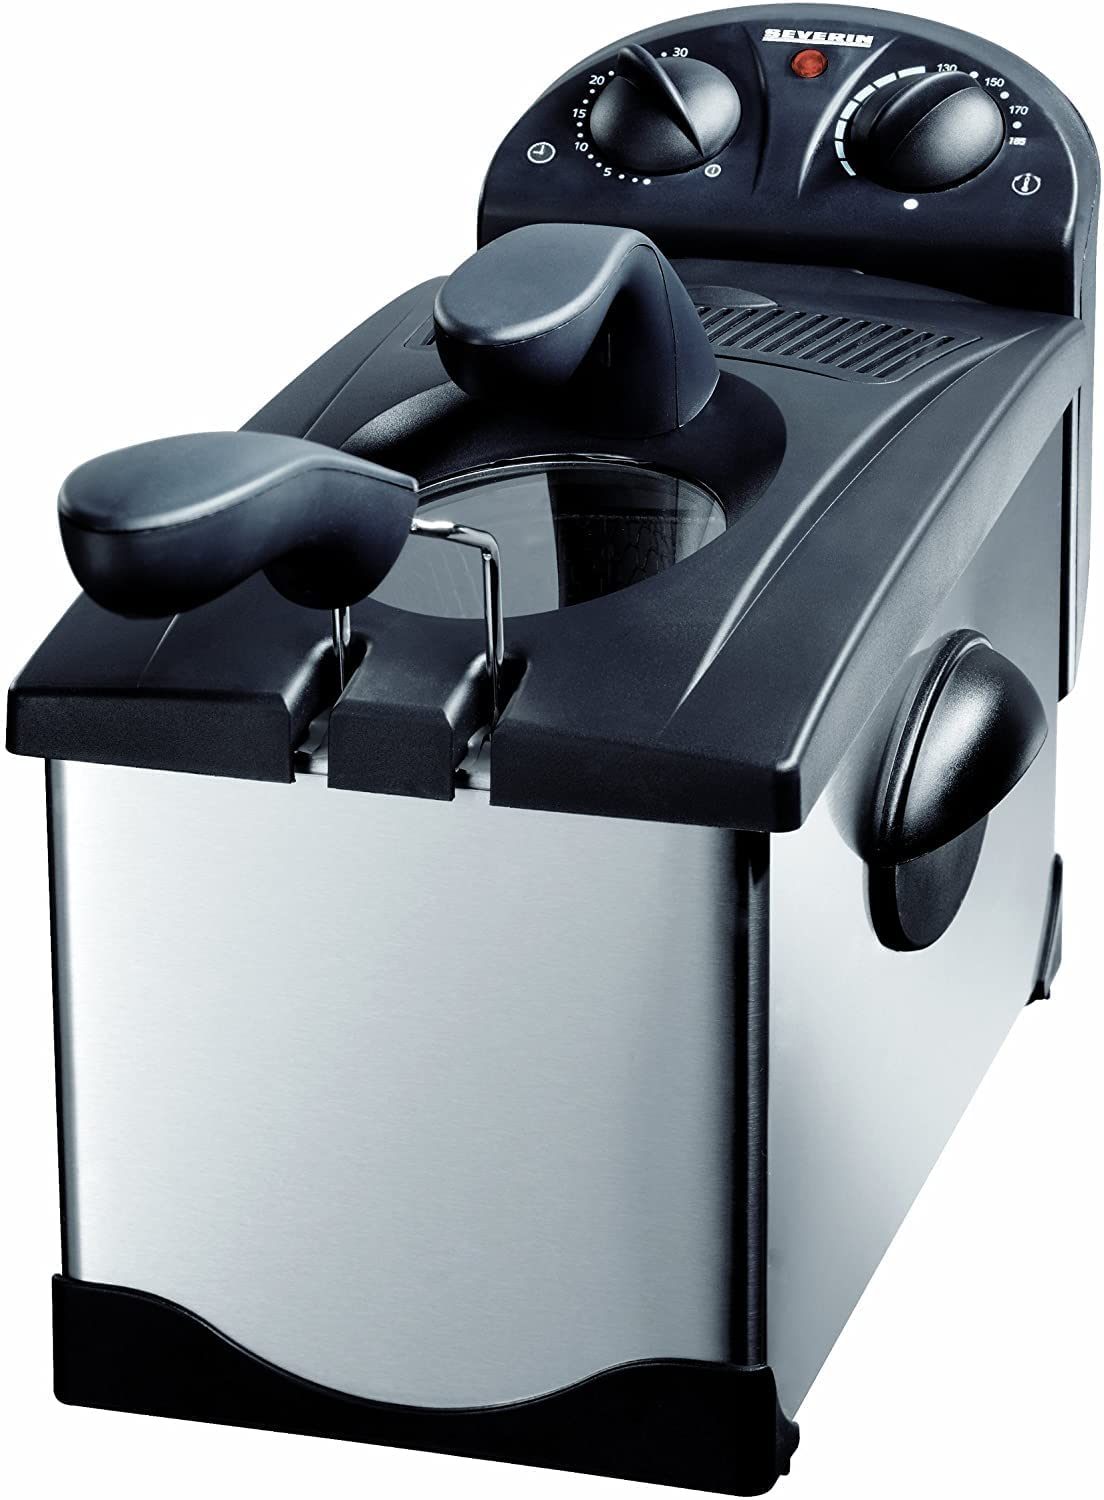 Severin FR 2414 Brushed Stainless Steel/Black/3.0 Litre Capacity Deep Fat Fryer Chip Quantity 600/2100 W